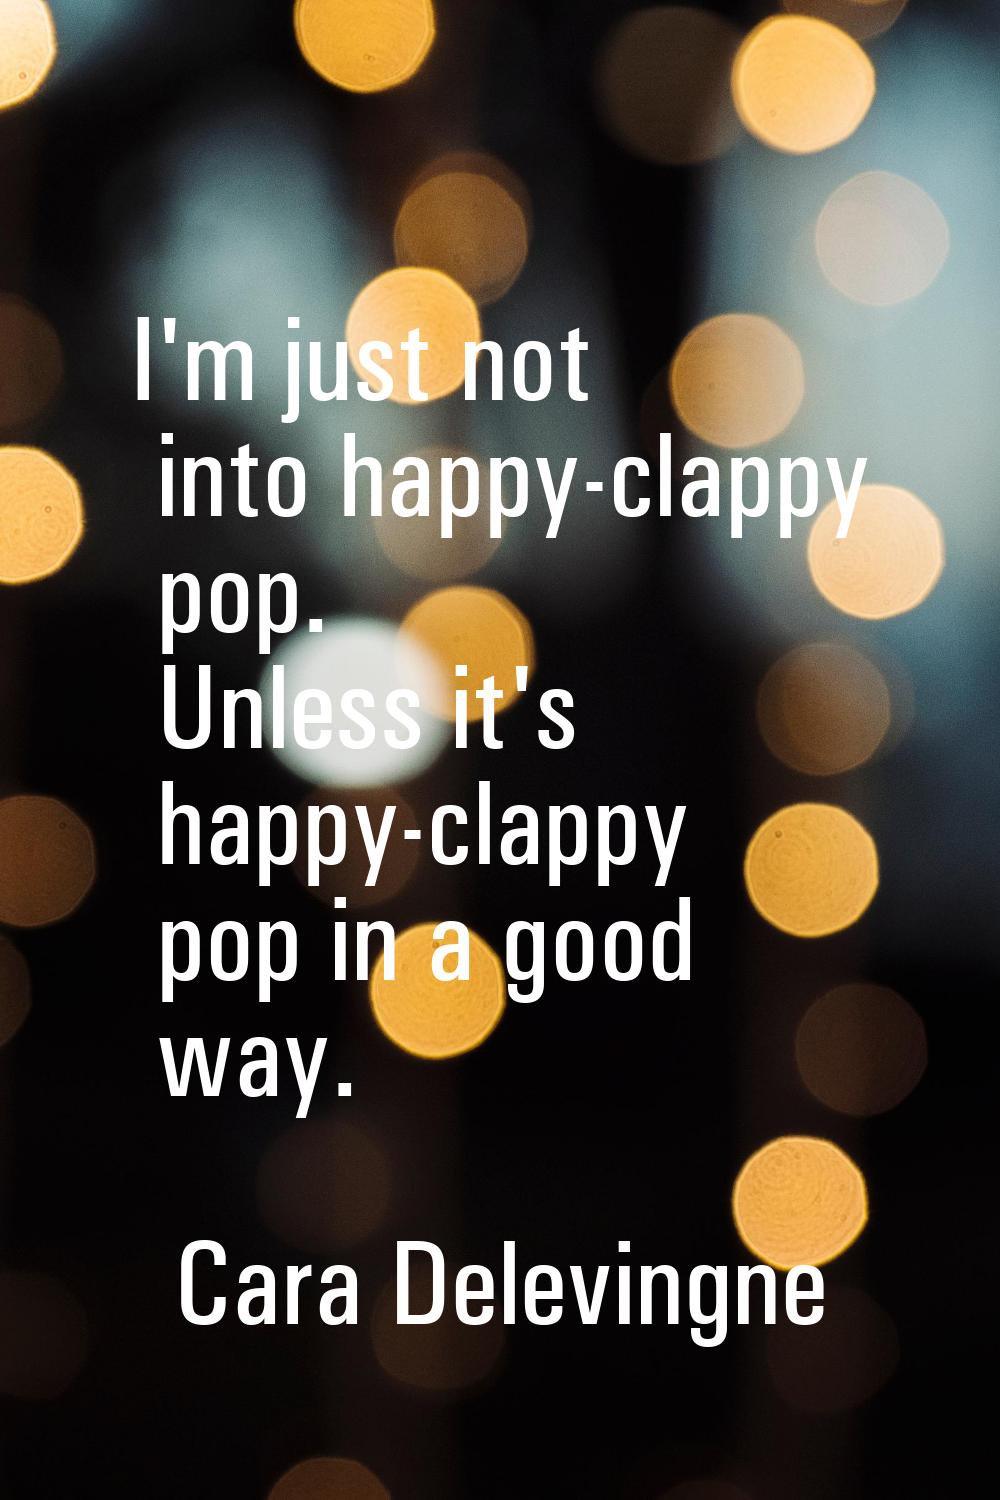 I'm just not into happy-clappy pop. Unless it's happy-clappy pop in a good way.